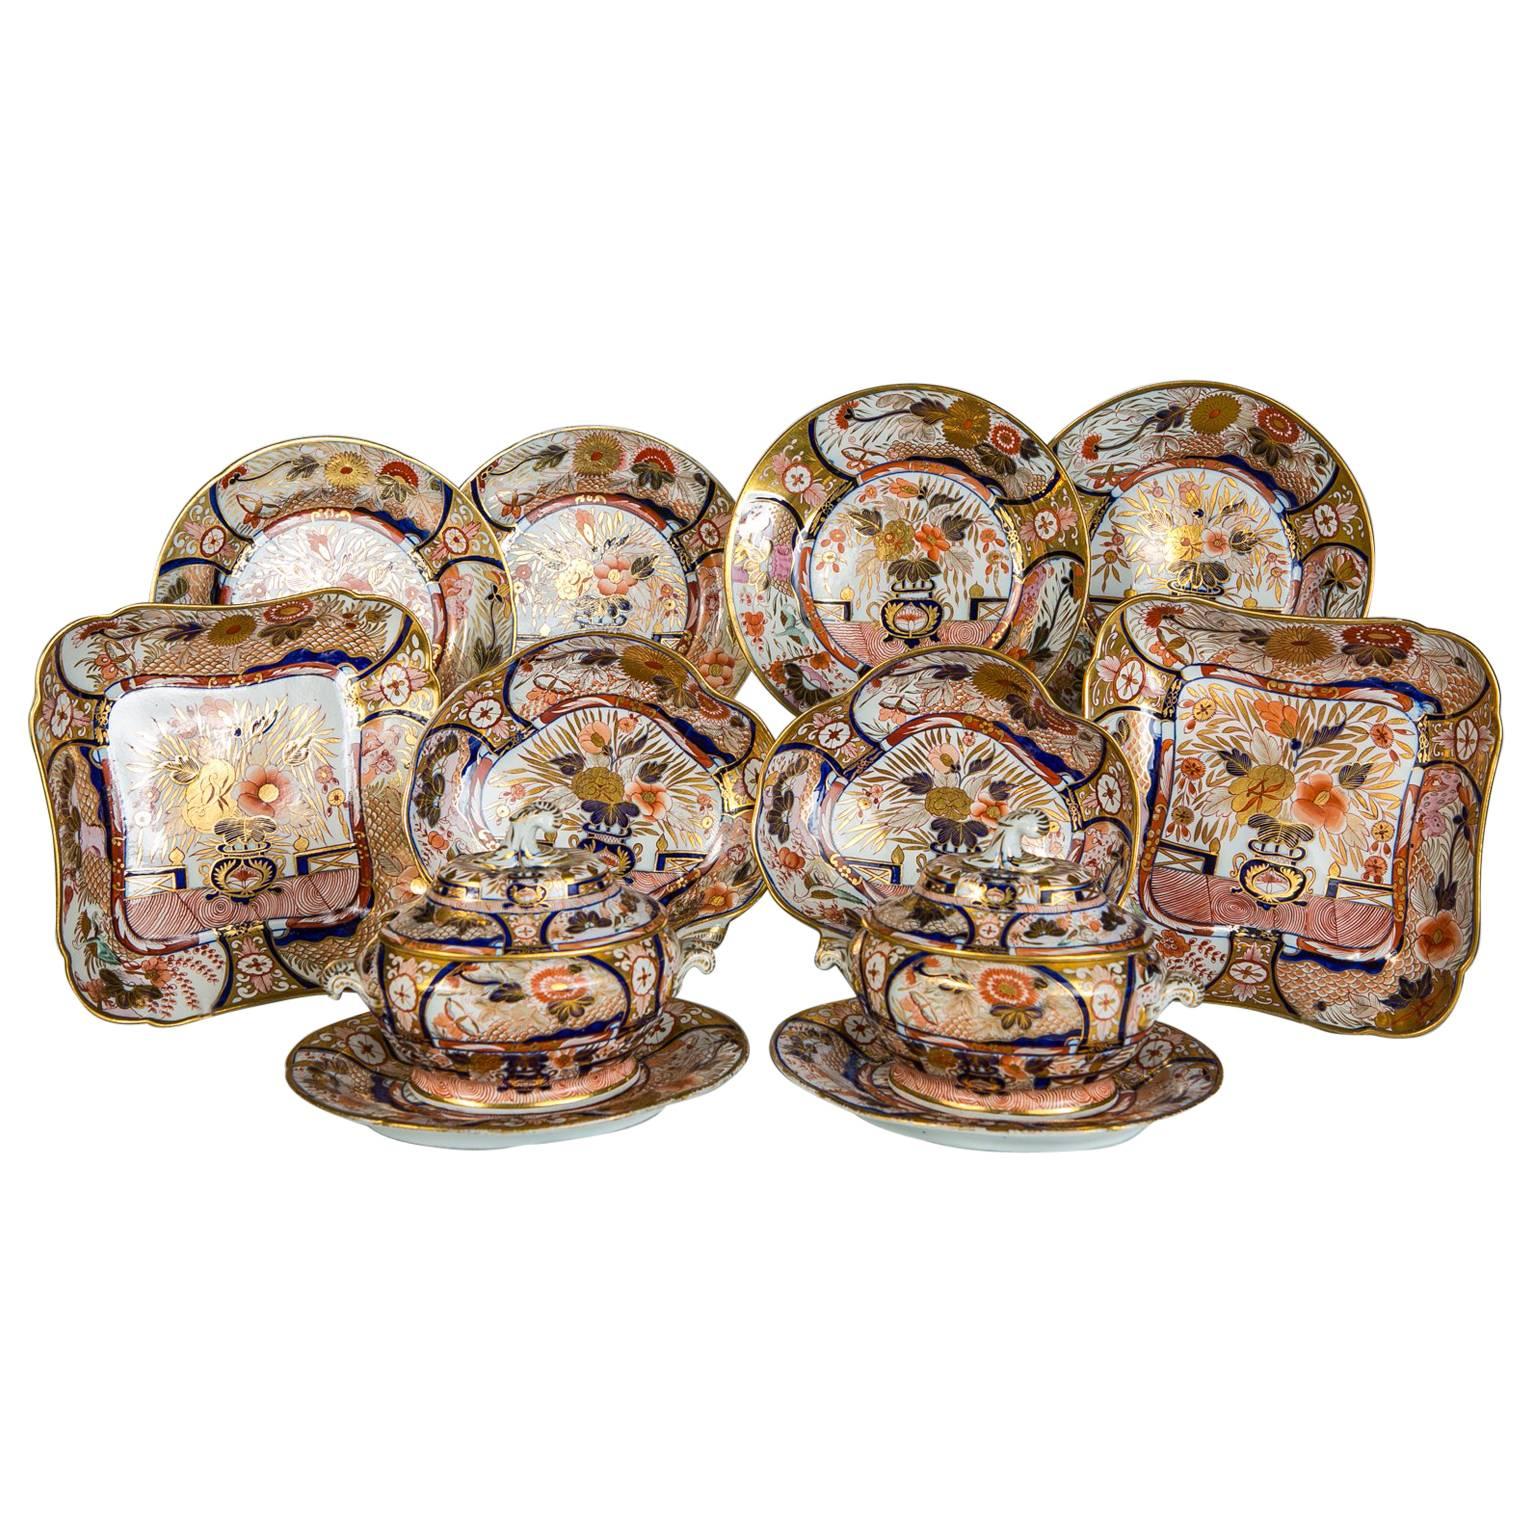 Antique Imari Porcelain Dishes in the Coalport "Admiral Nelson" Pattern